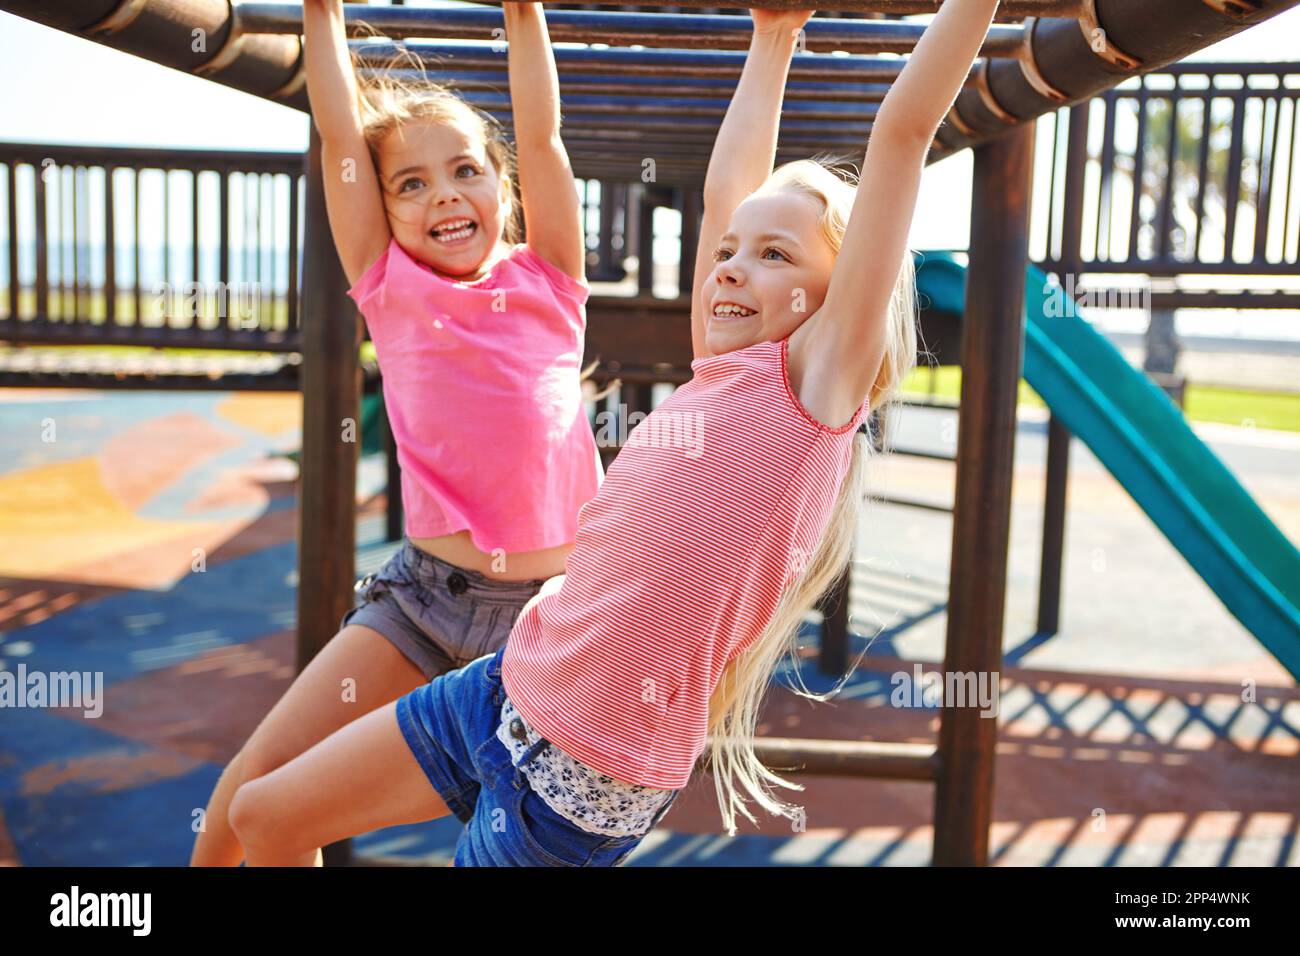 Sisters make the best of friends. two little girls hanging on the monkey bars at the playground. Stock Photo